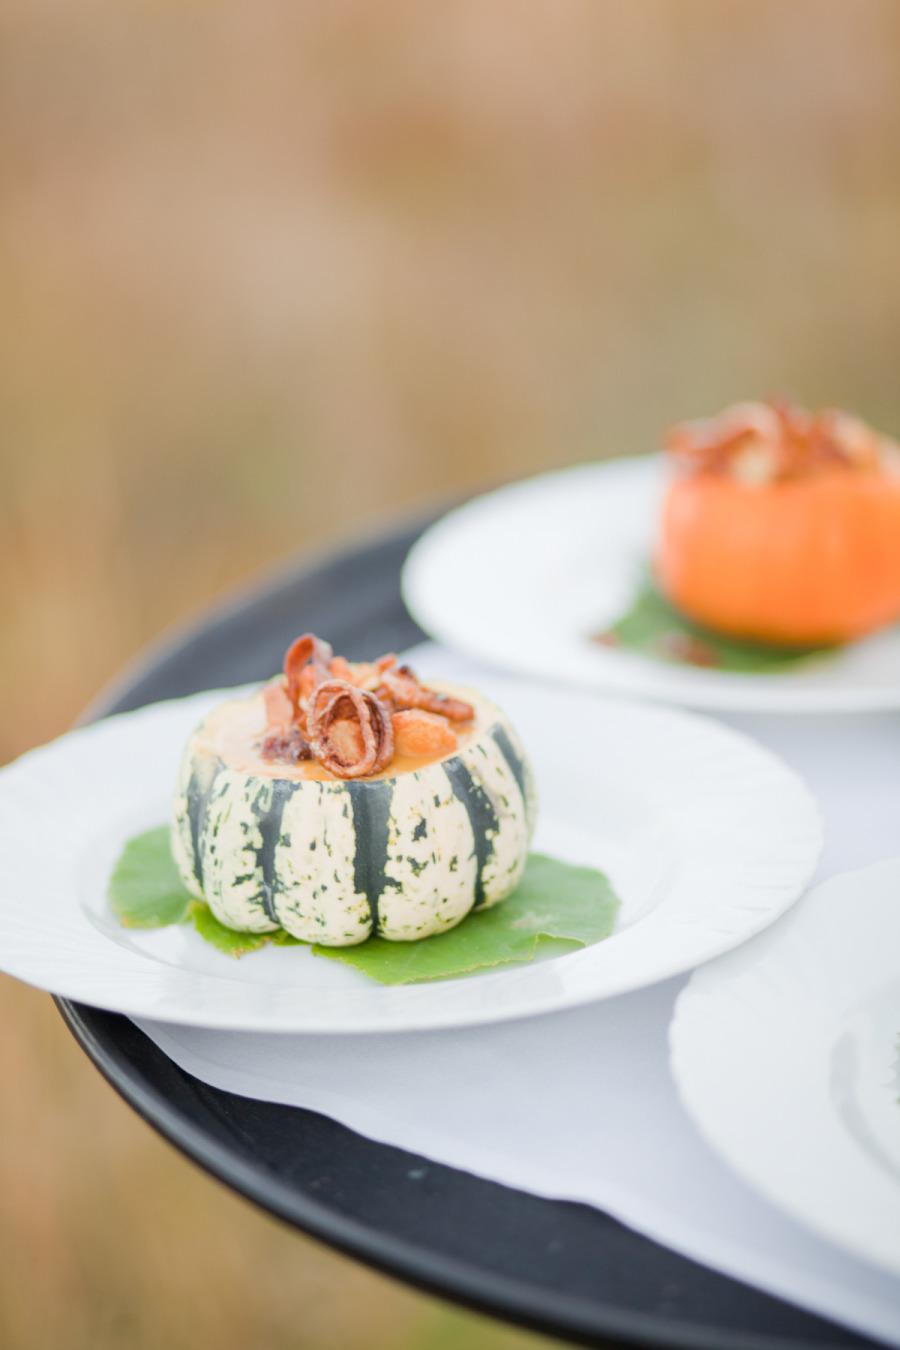 10 Ways to Add "Pumpkins" Into Your Fall Wedding Philly In Love Philadelphia Weddings